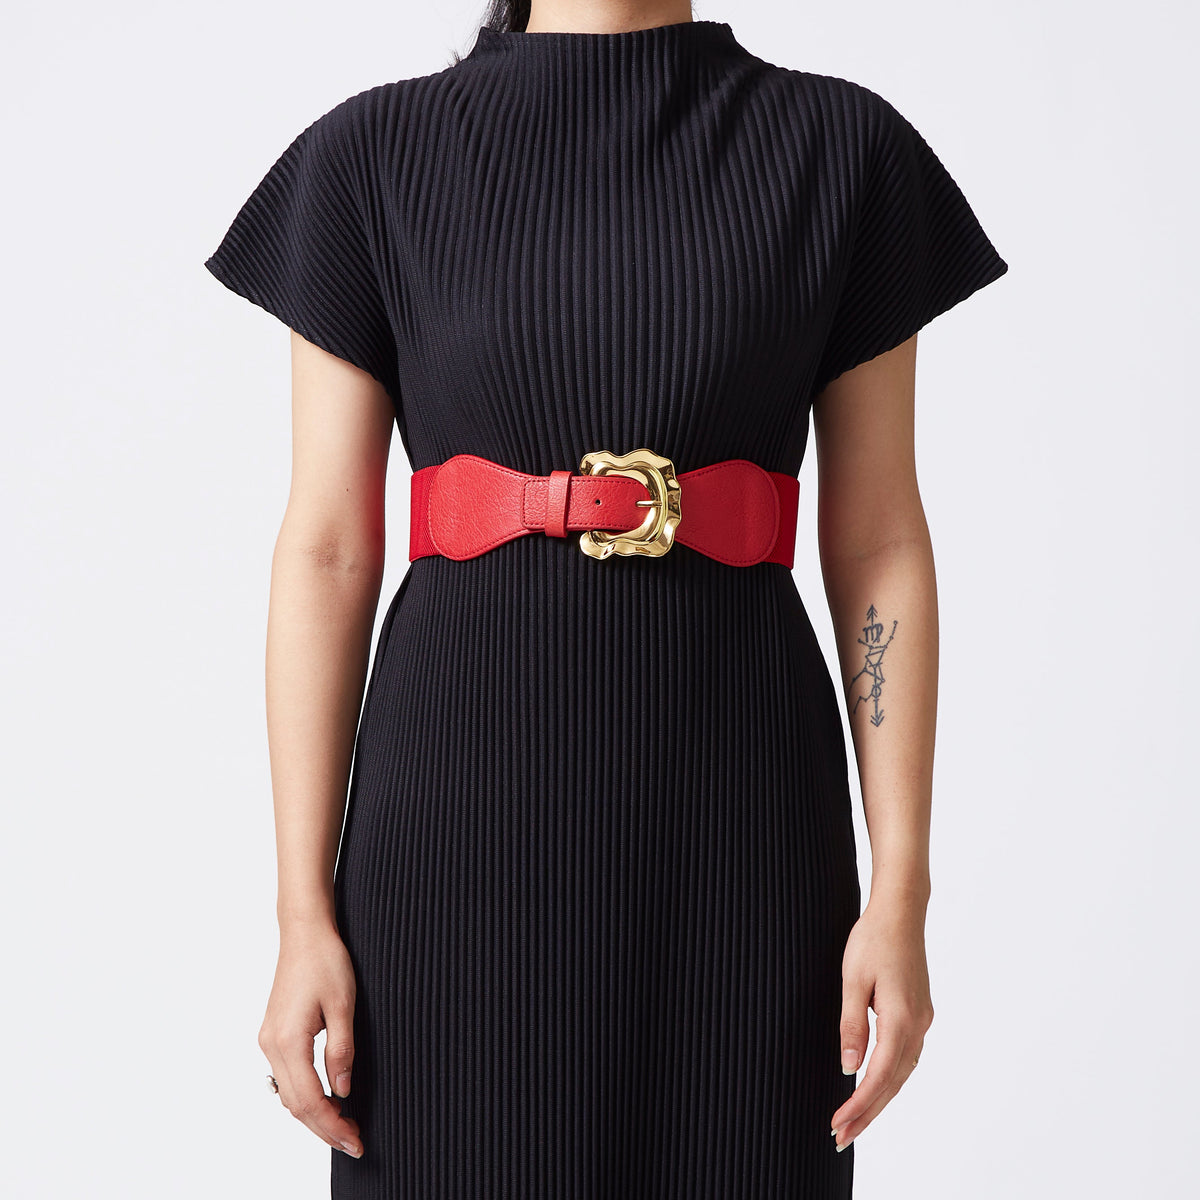 Elastic Backed Belt - Distended Gold Buckle - Red